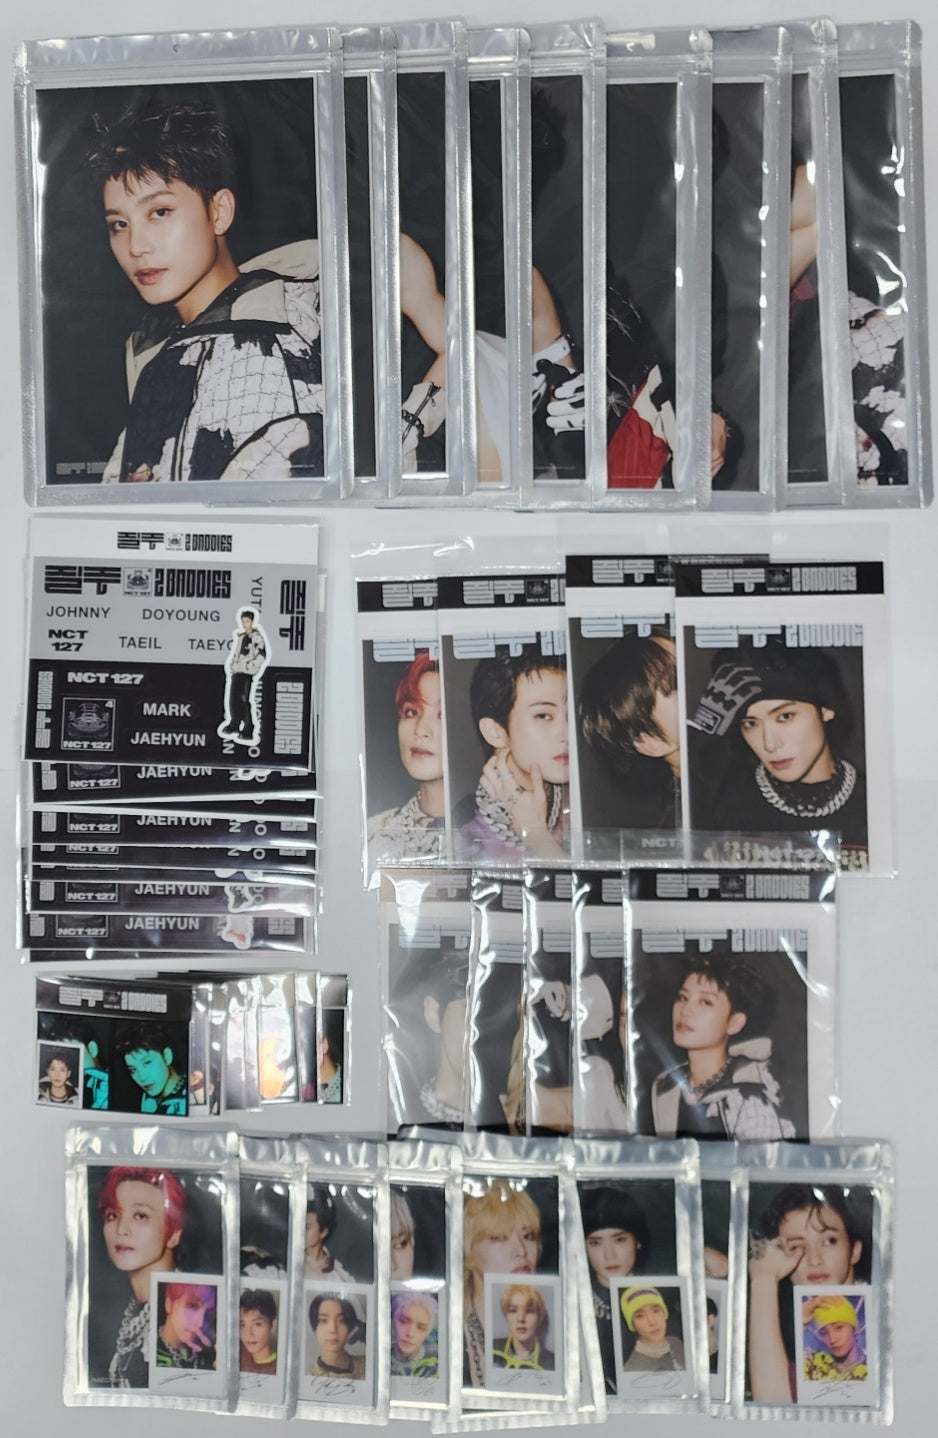 NCT 127 "질주 Street" POP-UP Store - Official MD [ステッカーセット、4x6写真+ポラロイドセット、A4写真] [12/15更新]